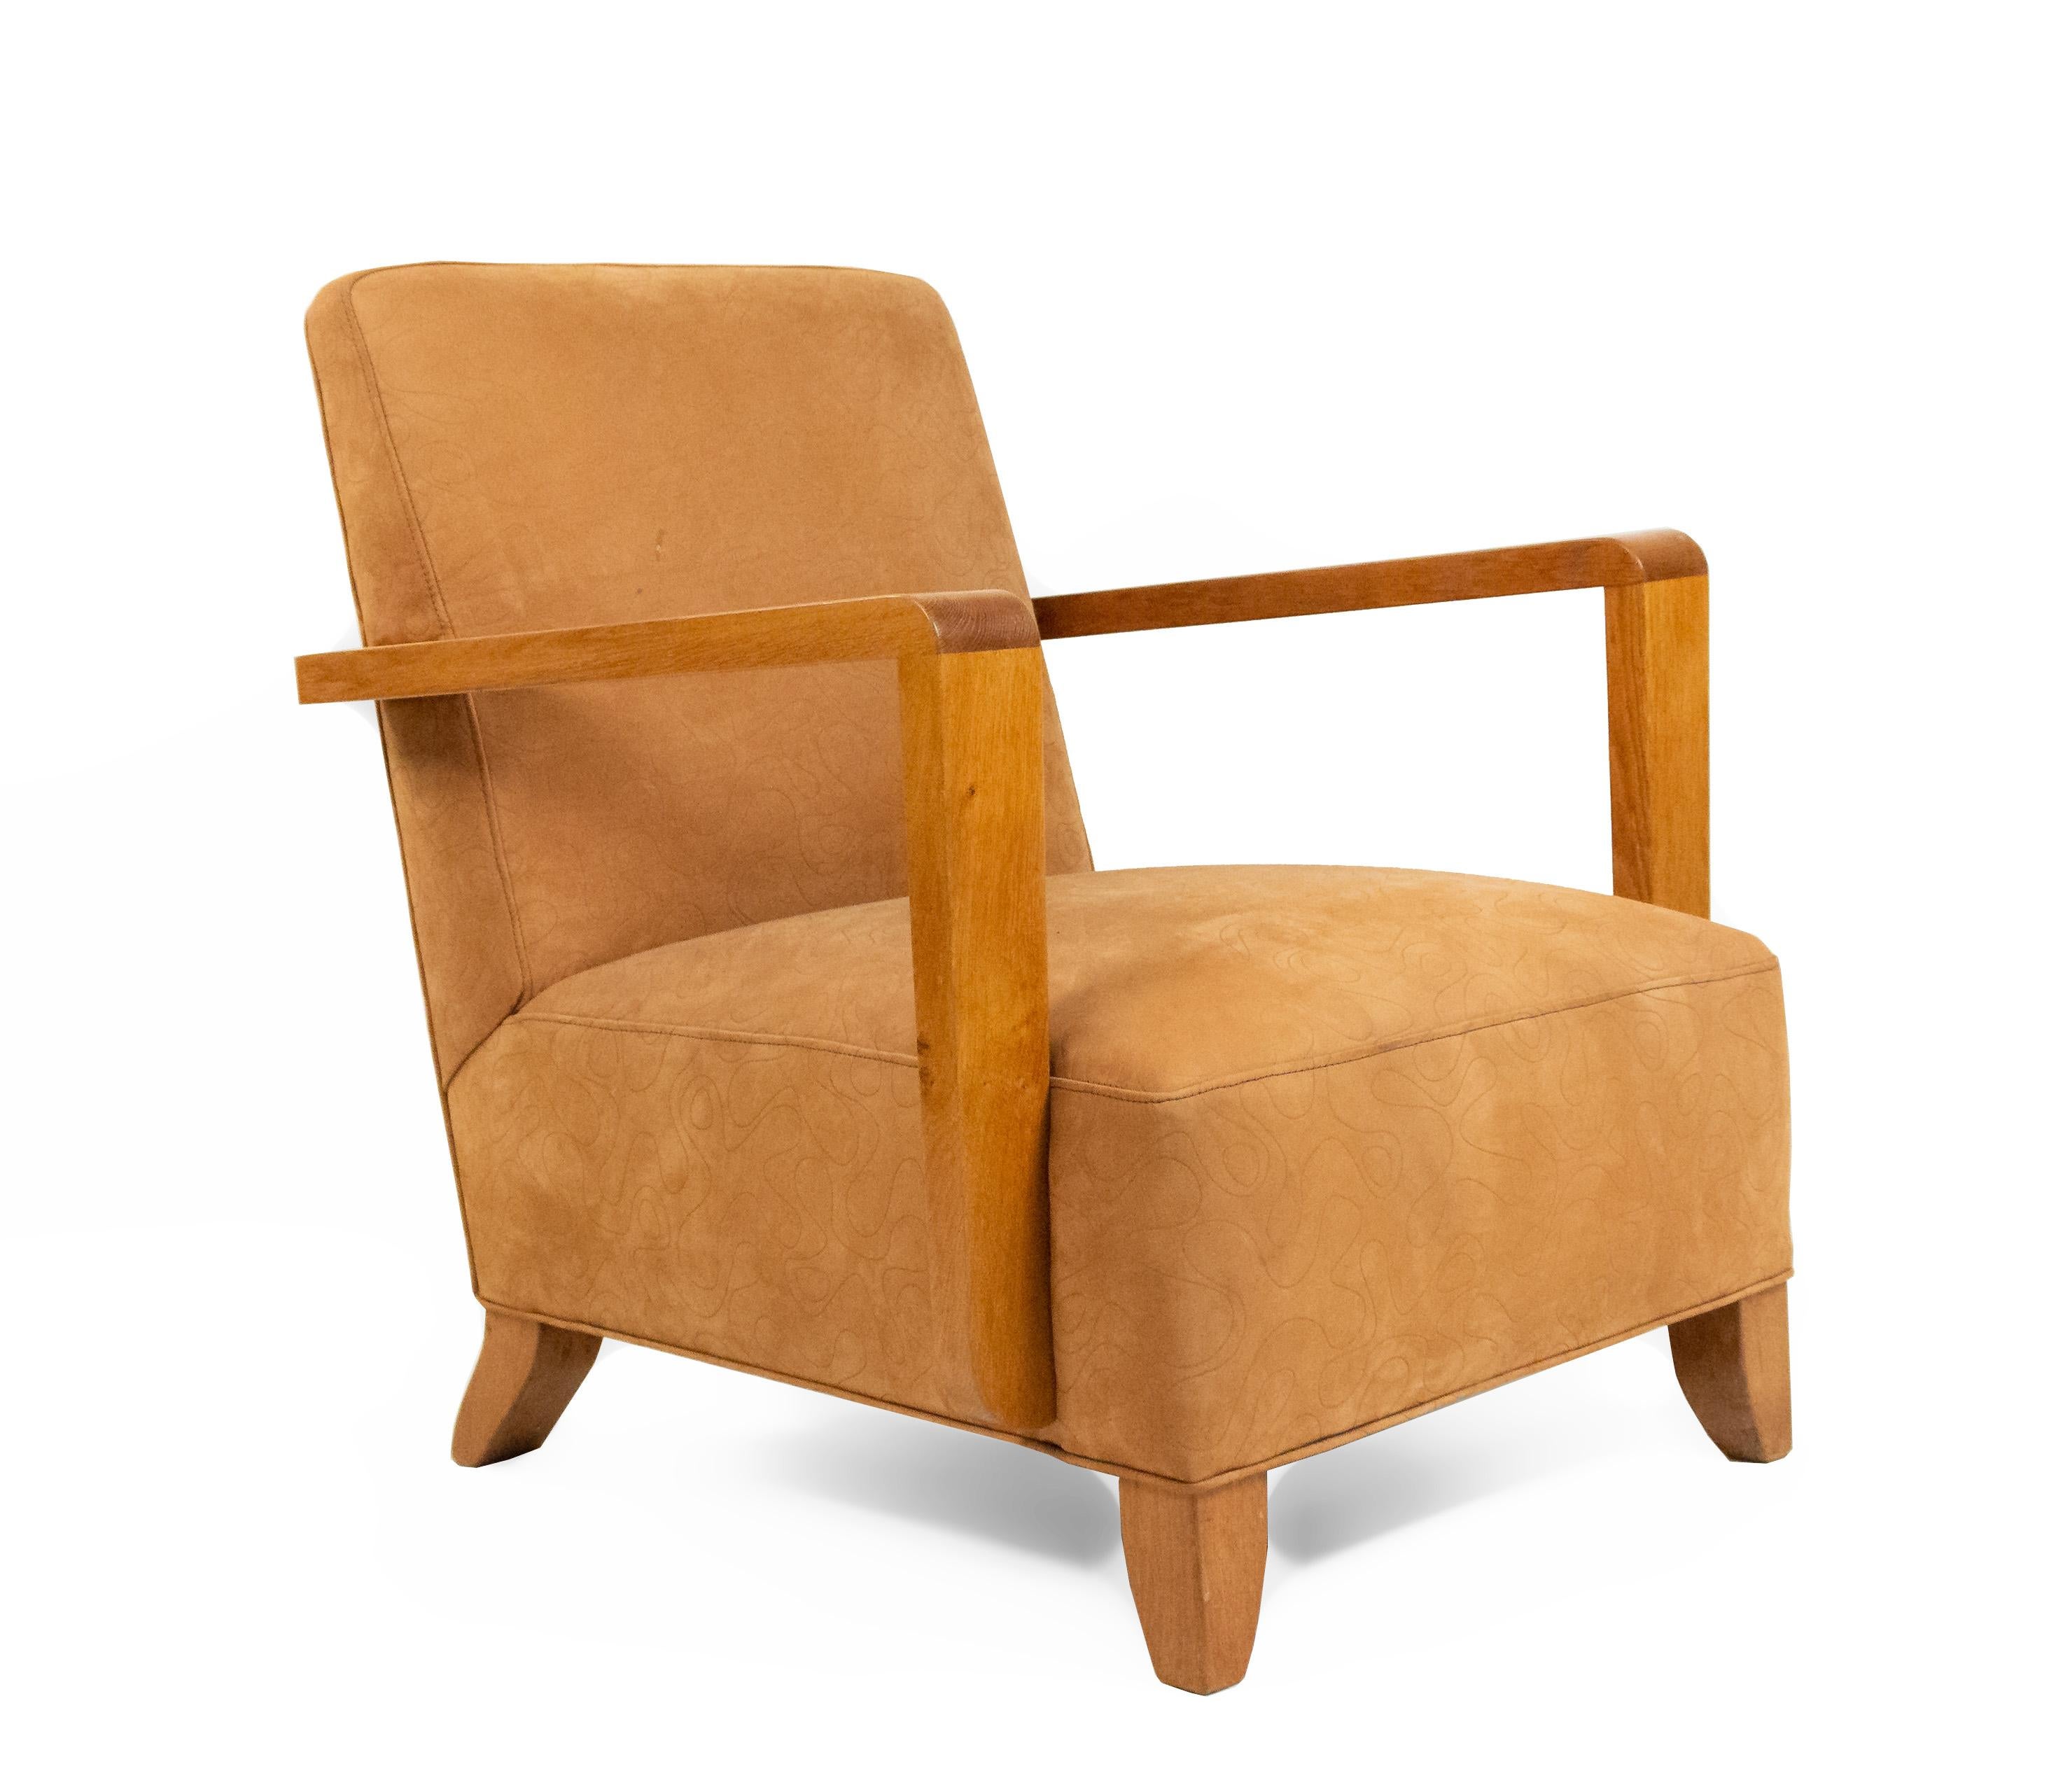 20th Century Pair of Tan French Modernist Oak Armchairs For Sale